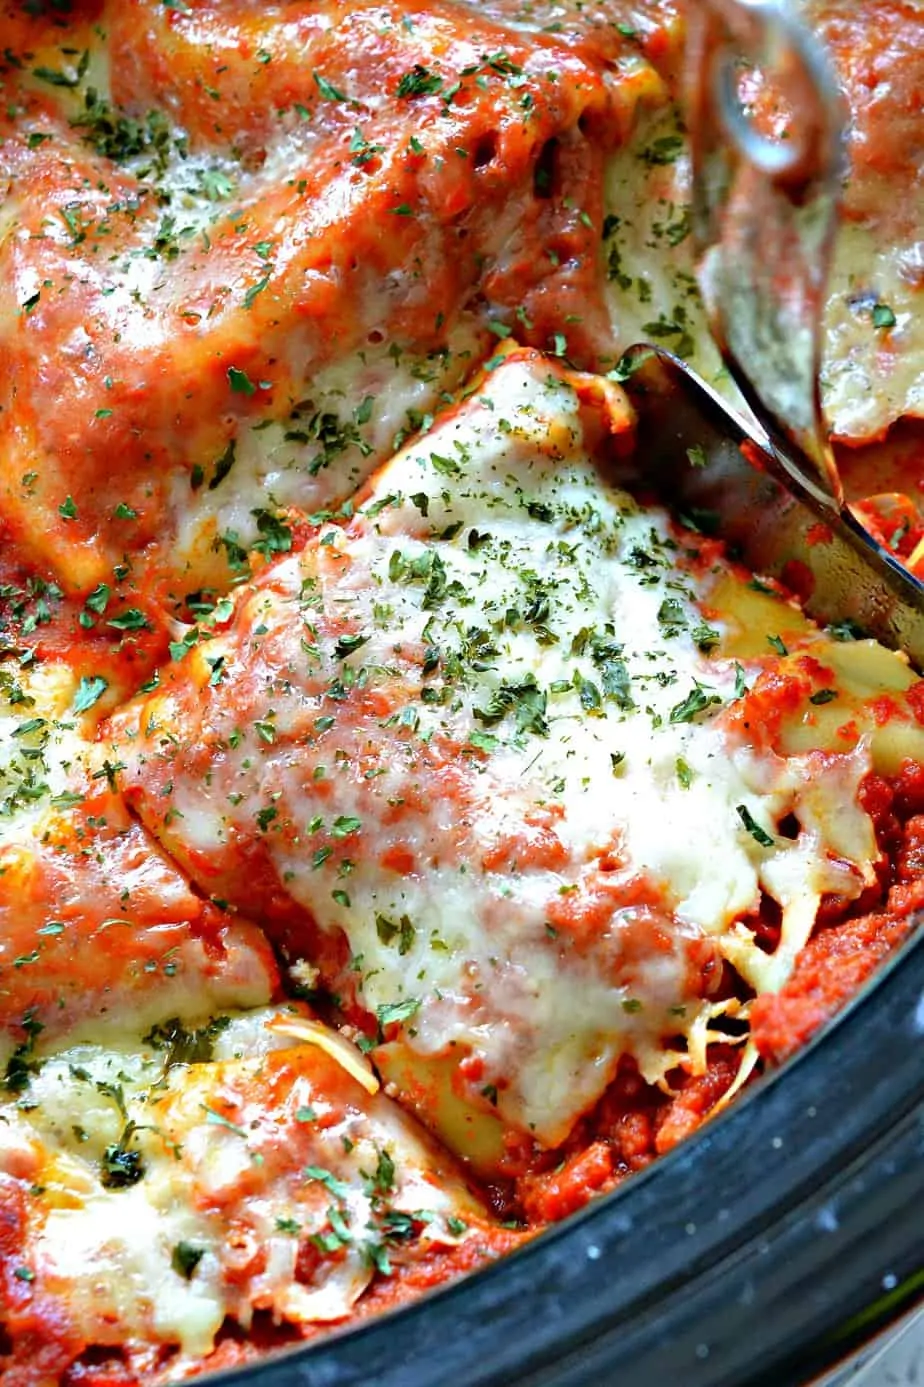 Rich and creamy Crock Pot Lasagna is layers of pasta, cheese, and rich sauce.